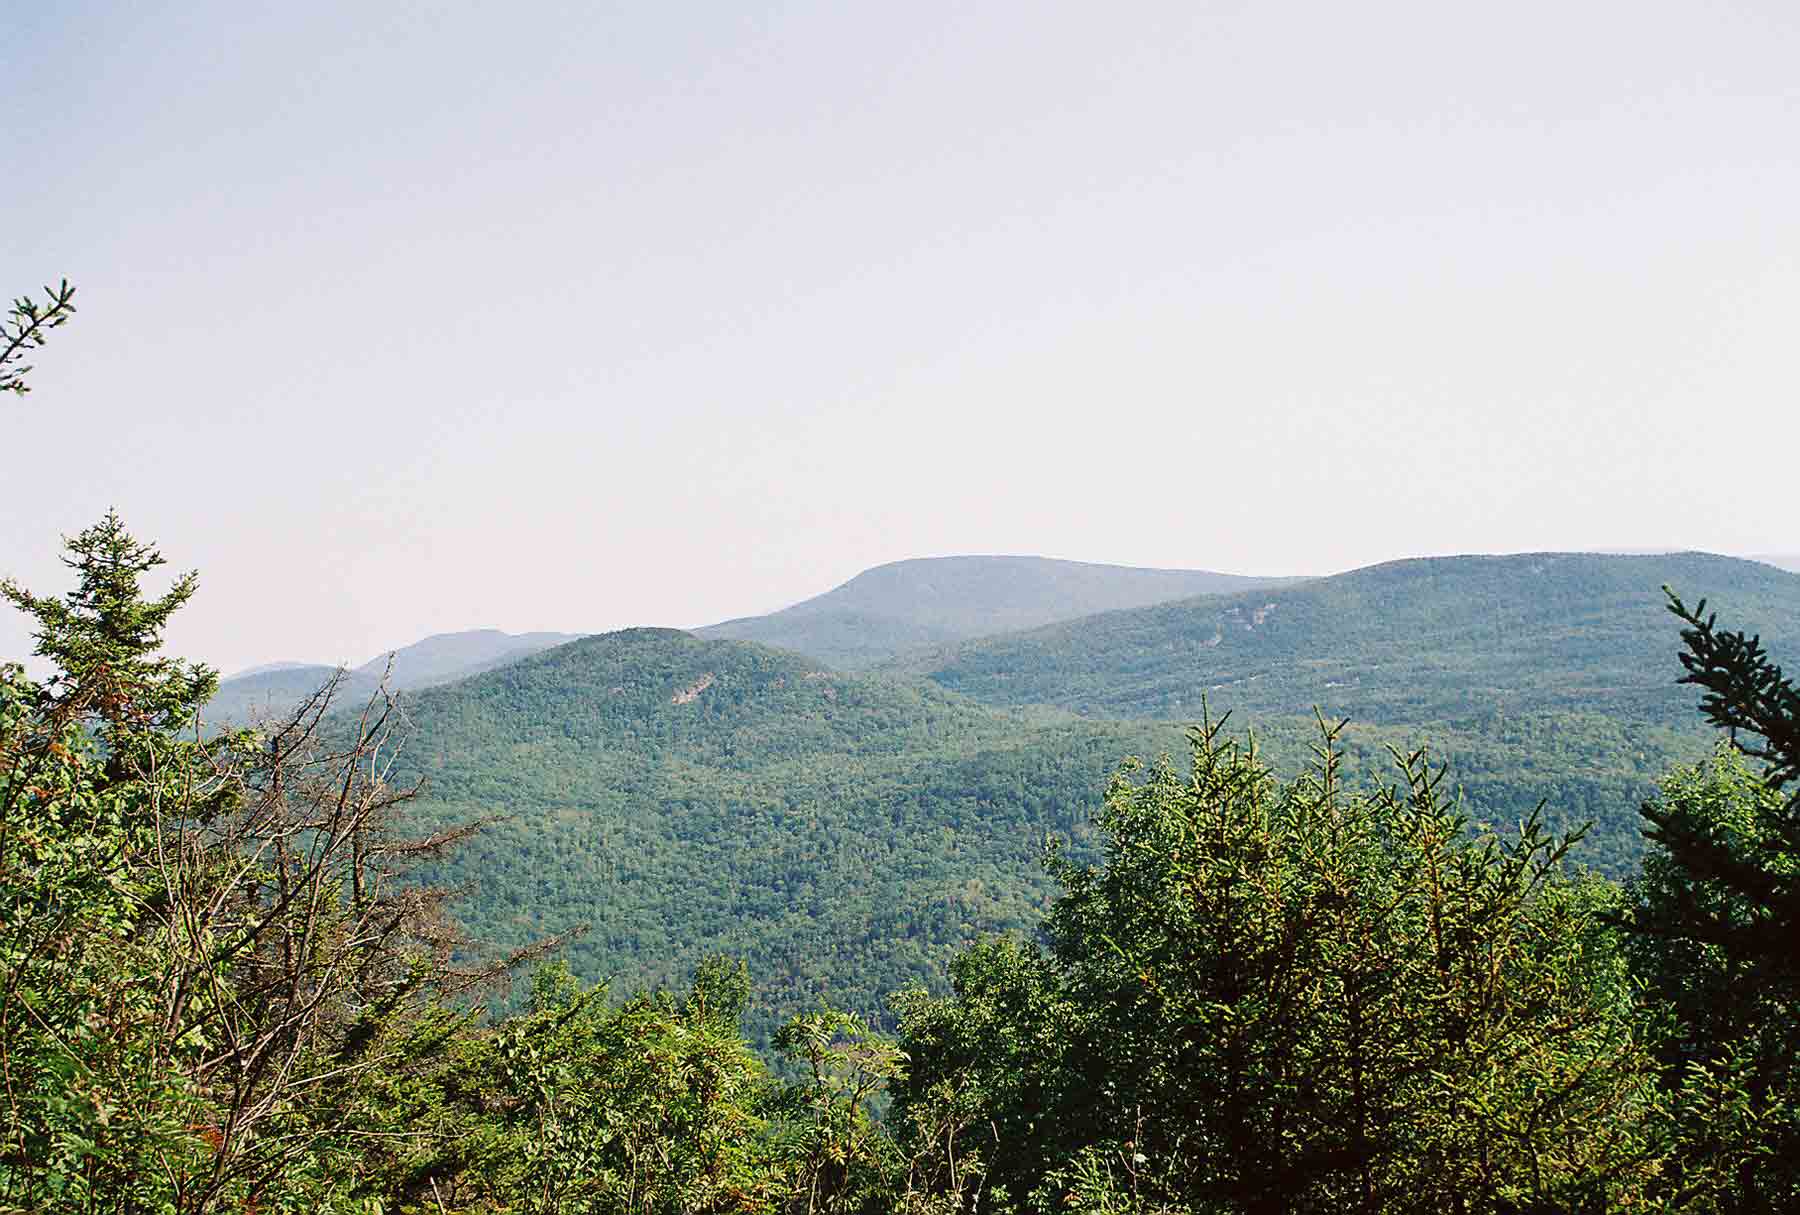 View from ledge at approx. Mile 4.9 on north side of North Moose Mt. Large peak is Smarts Mt. The one in foreground is Holts Ledges. The peak in the distance and to the left of Smarts is Mt. Cube. The AT climbs all three. Courtesy dlcul@conncoll.edu